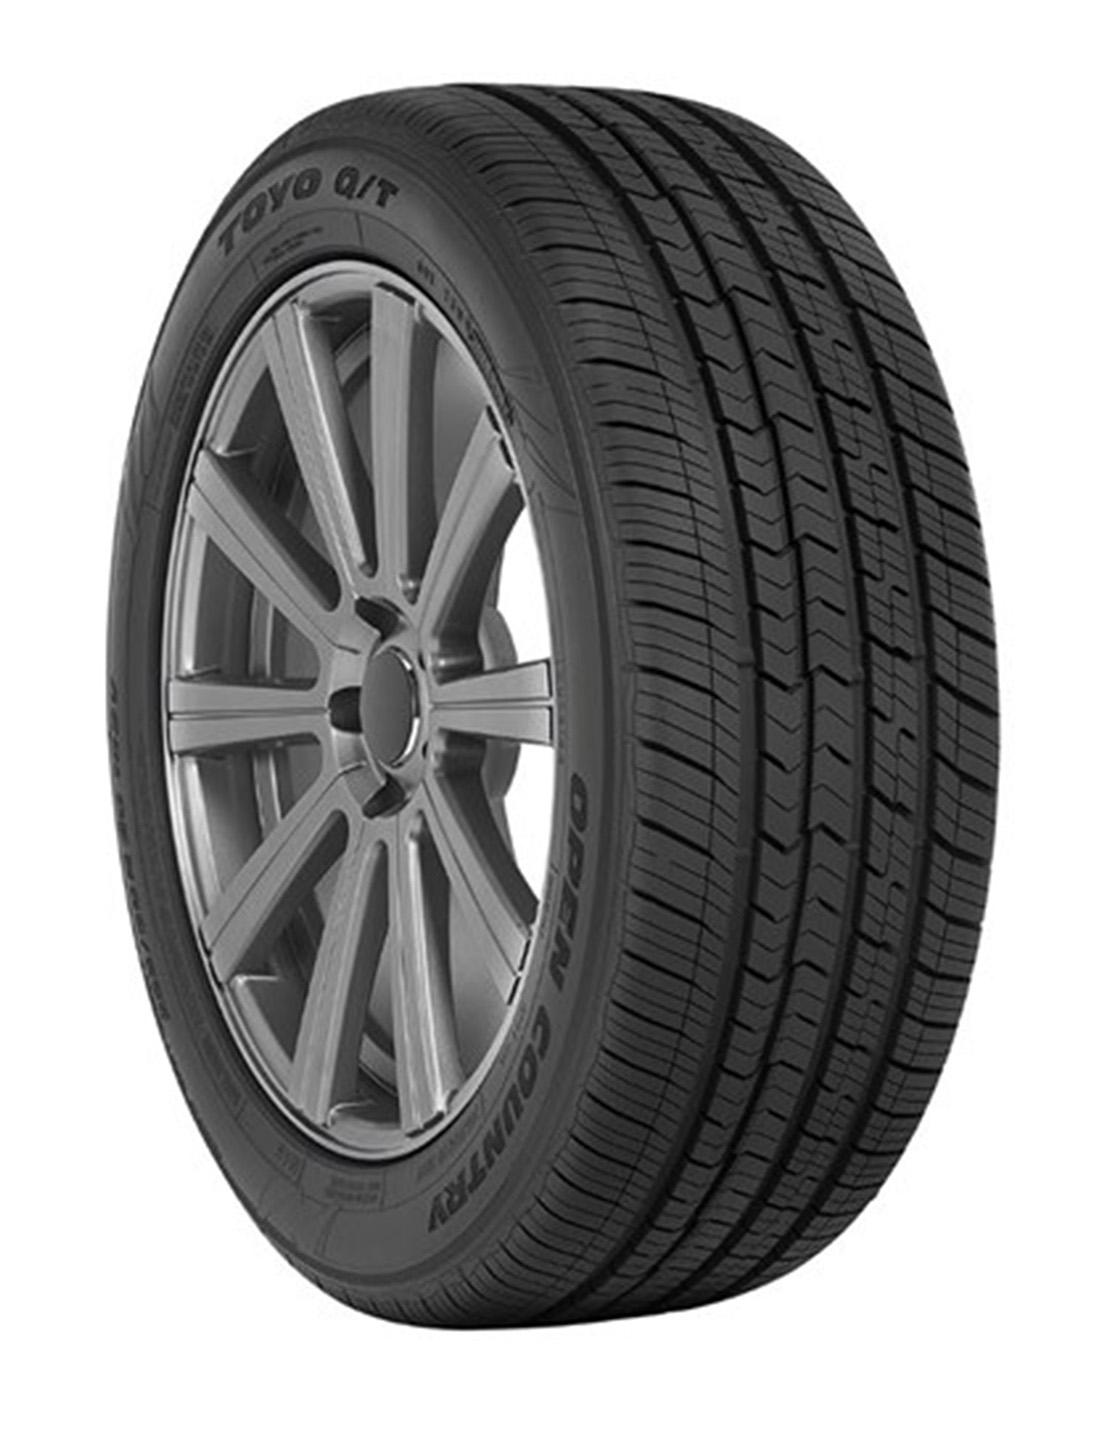 Toyo - OPEN COUNTRY QT HT  NW  265/60R18